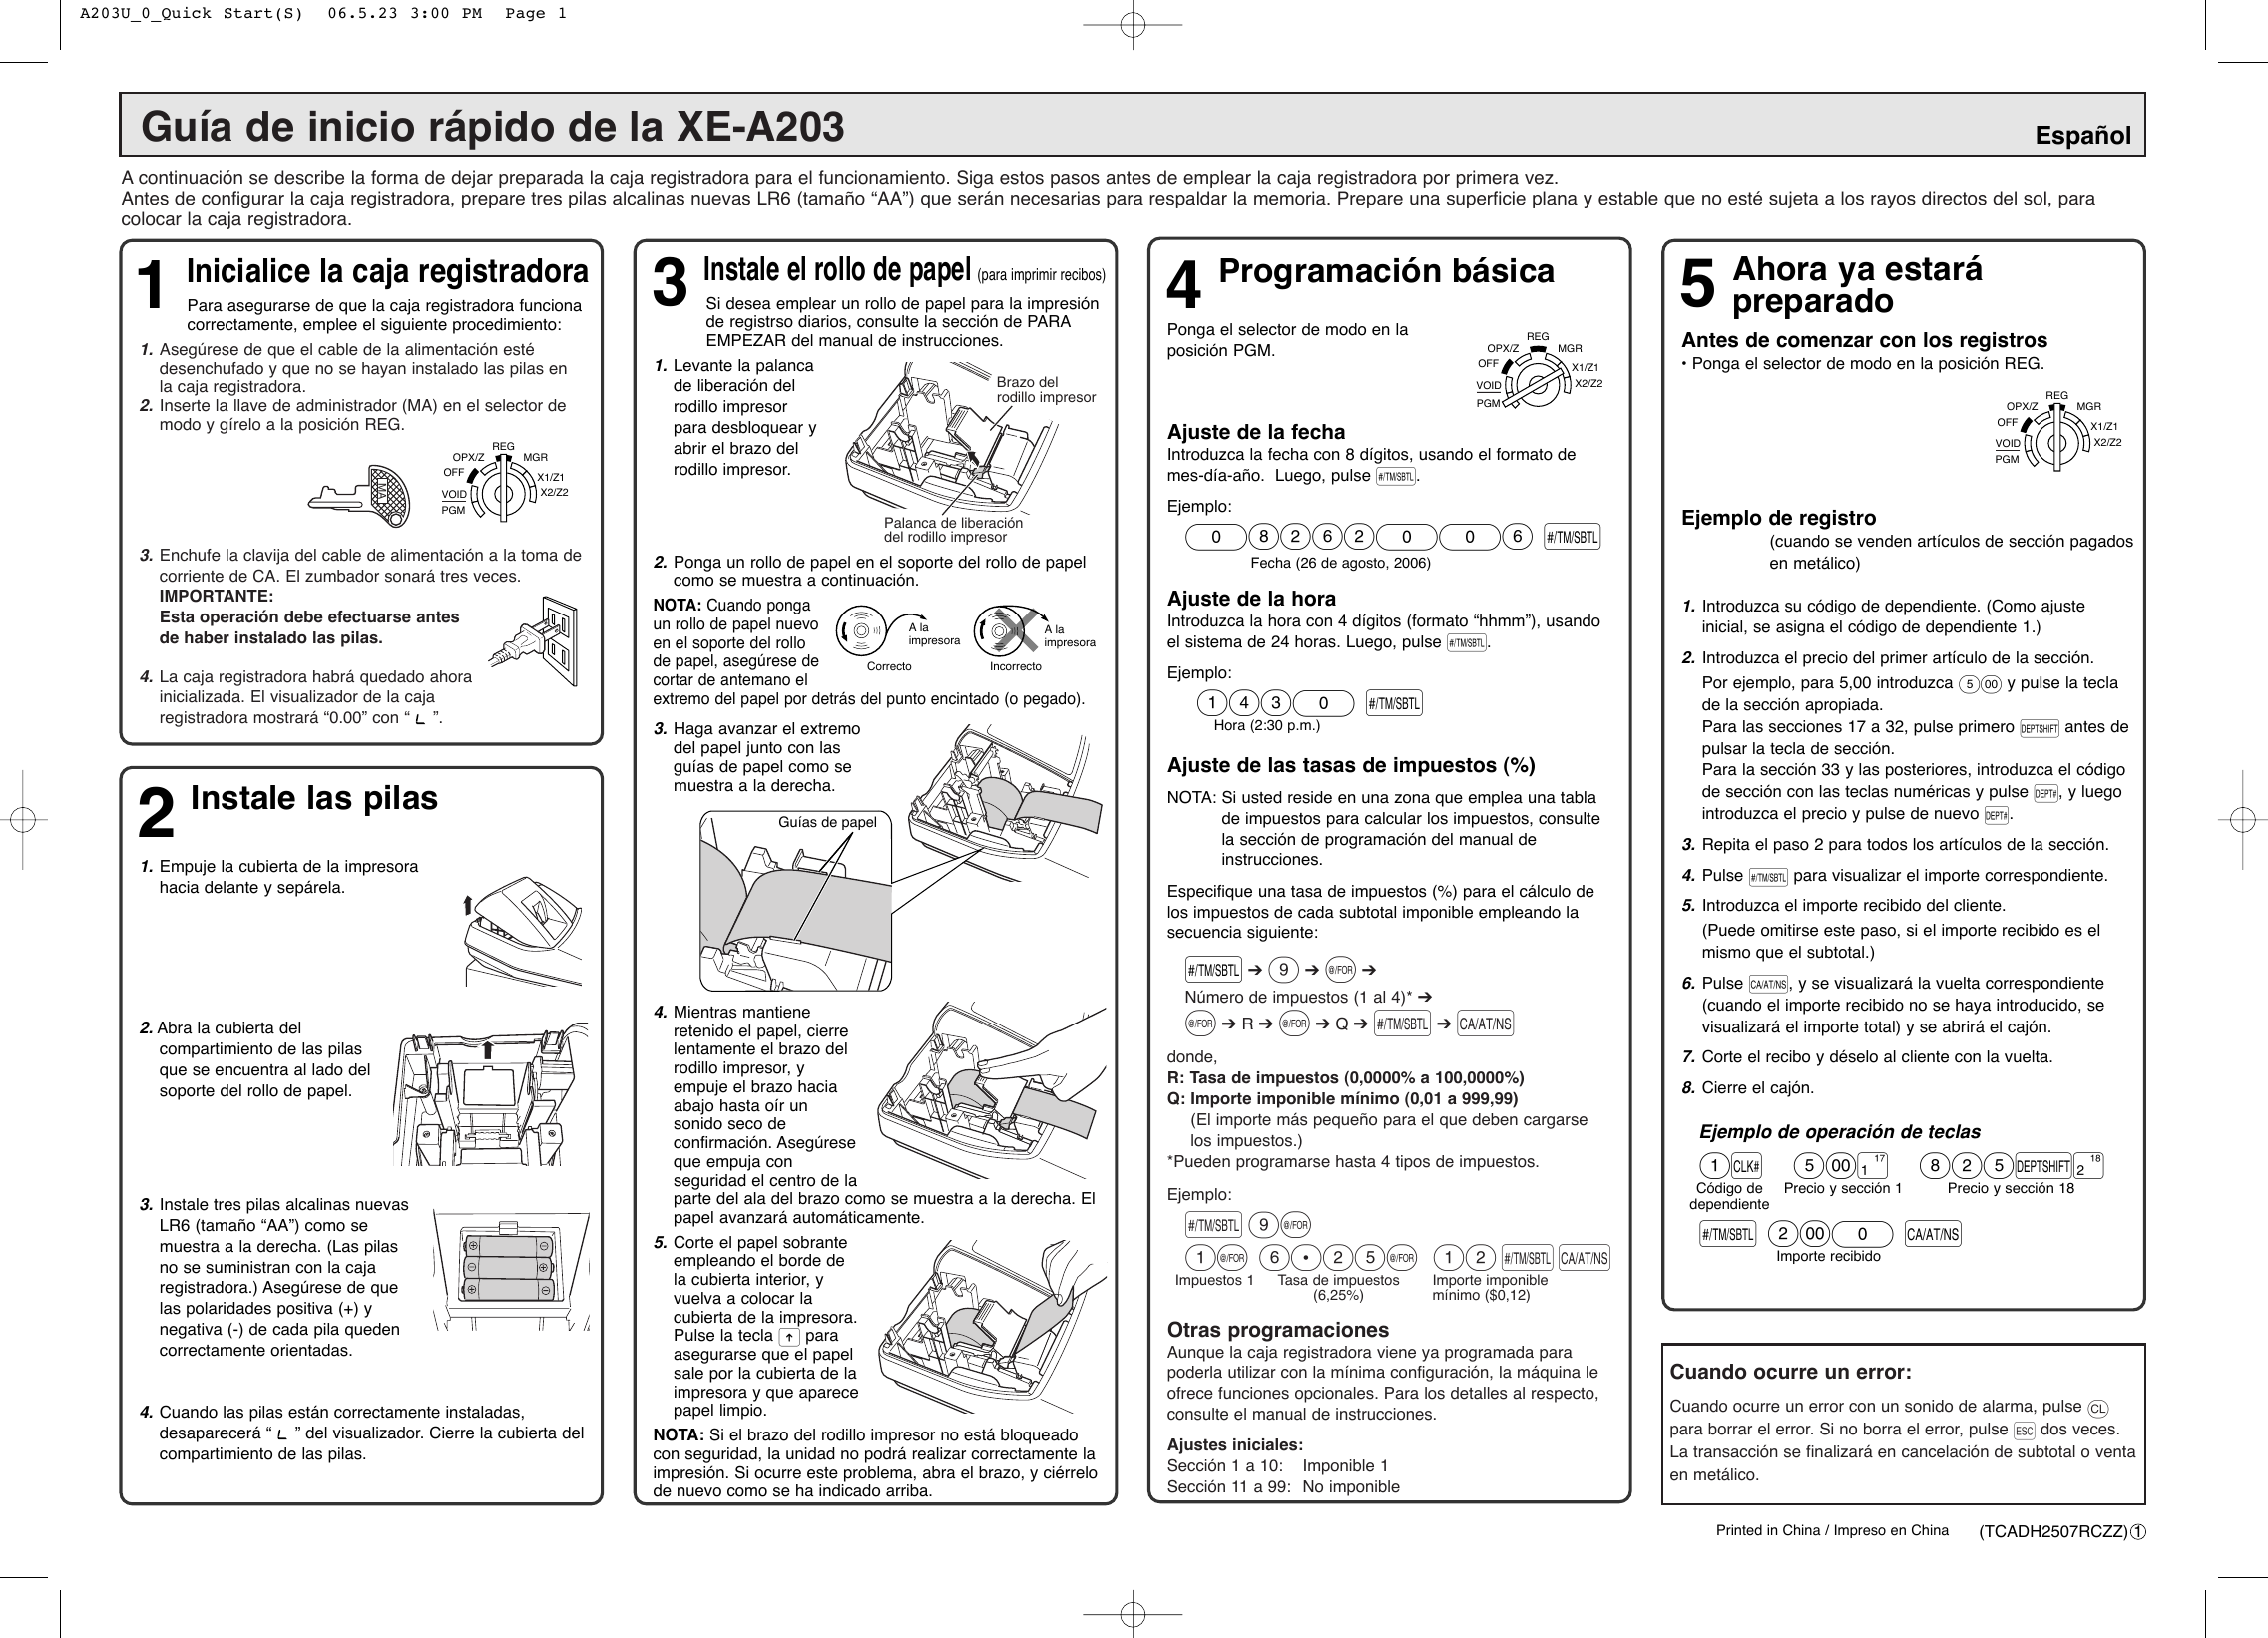 Page 2 of 2 - Sharp Sharp-Xe-A203-Quick-Guide- XE-A203 Quick Start Guide  Sharp-xe-a203-quick-guide